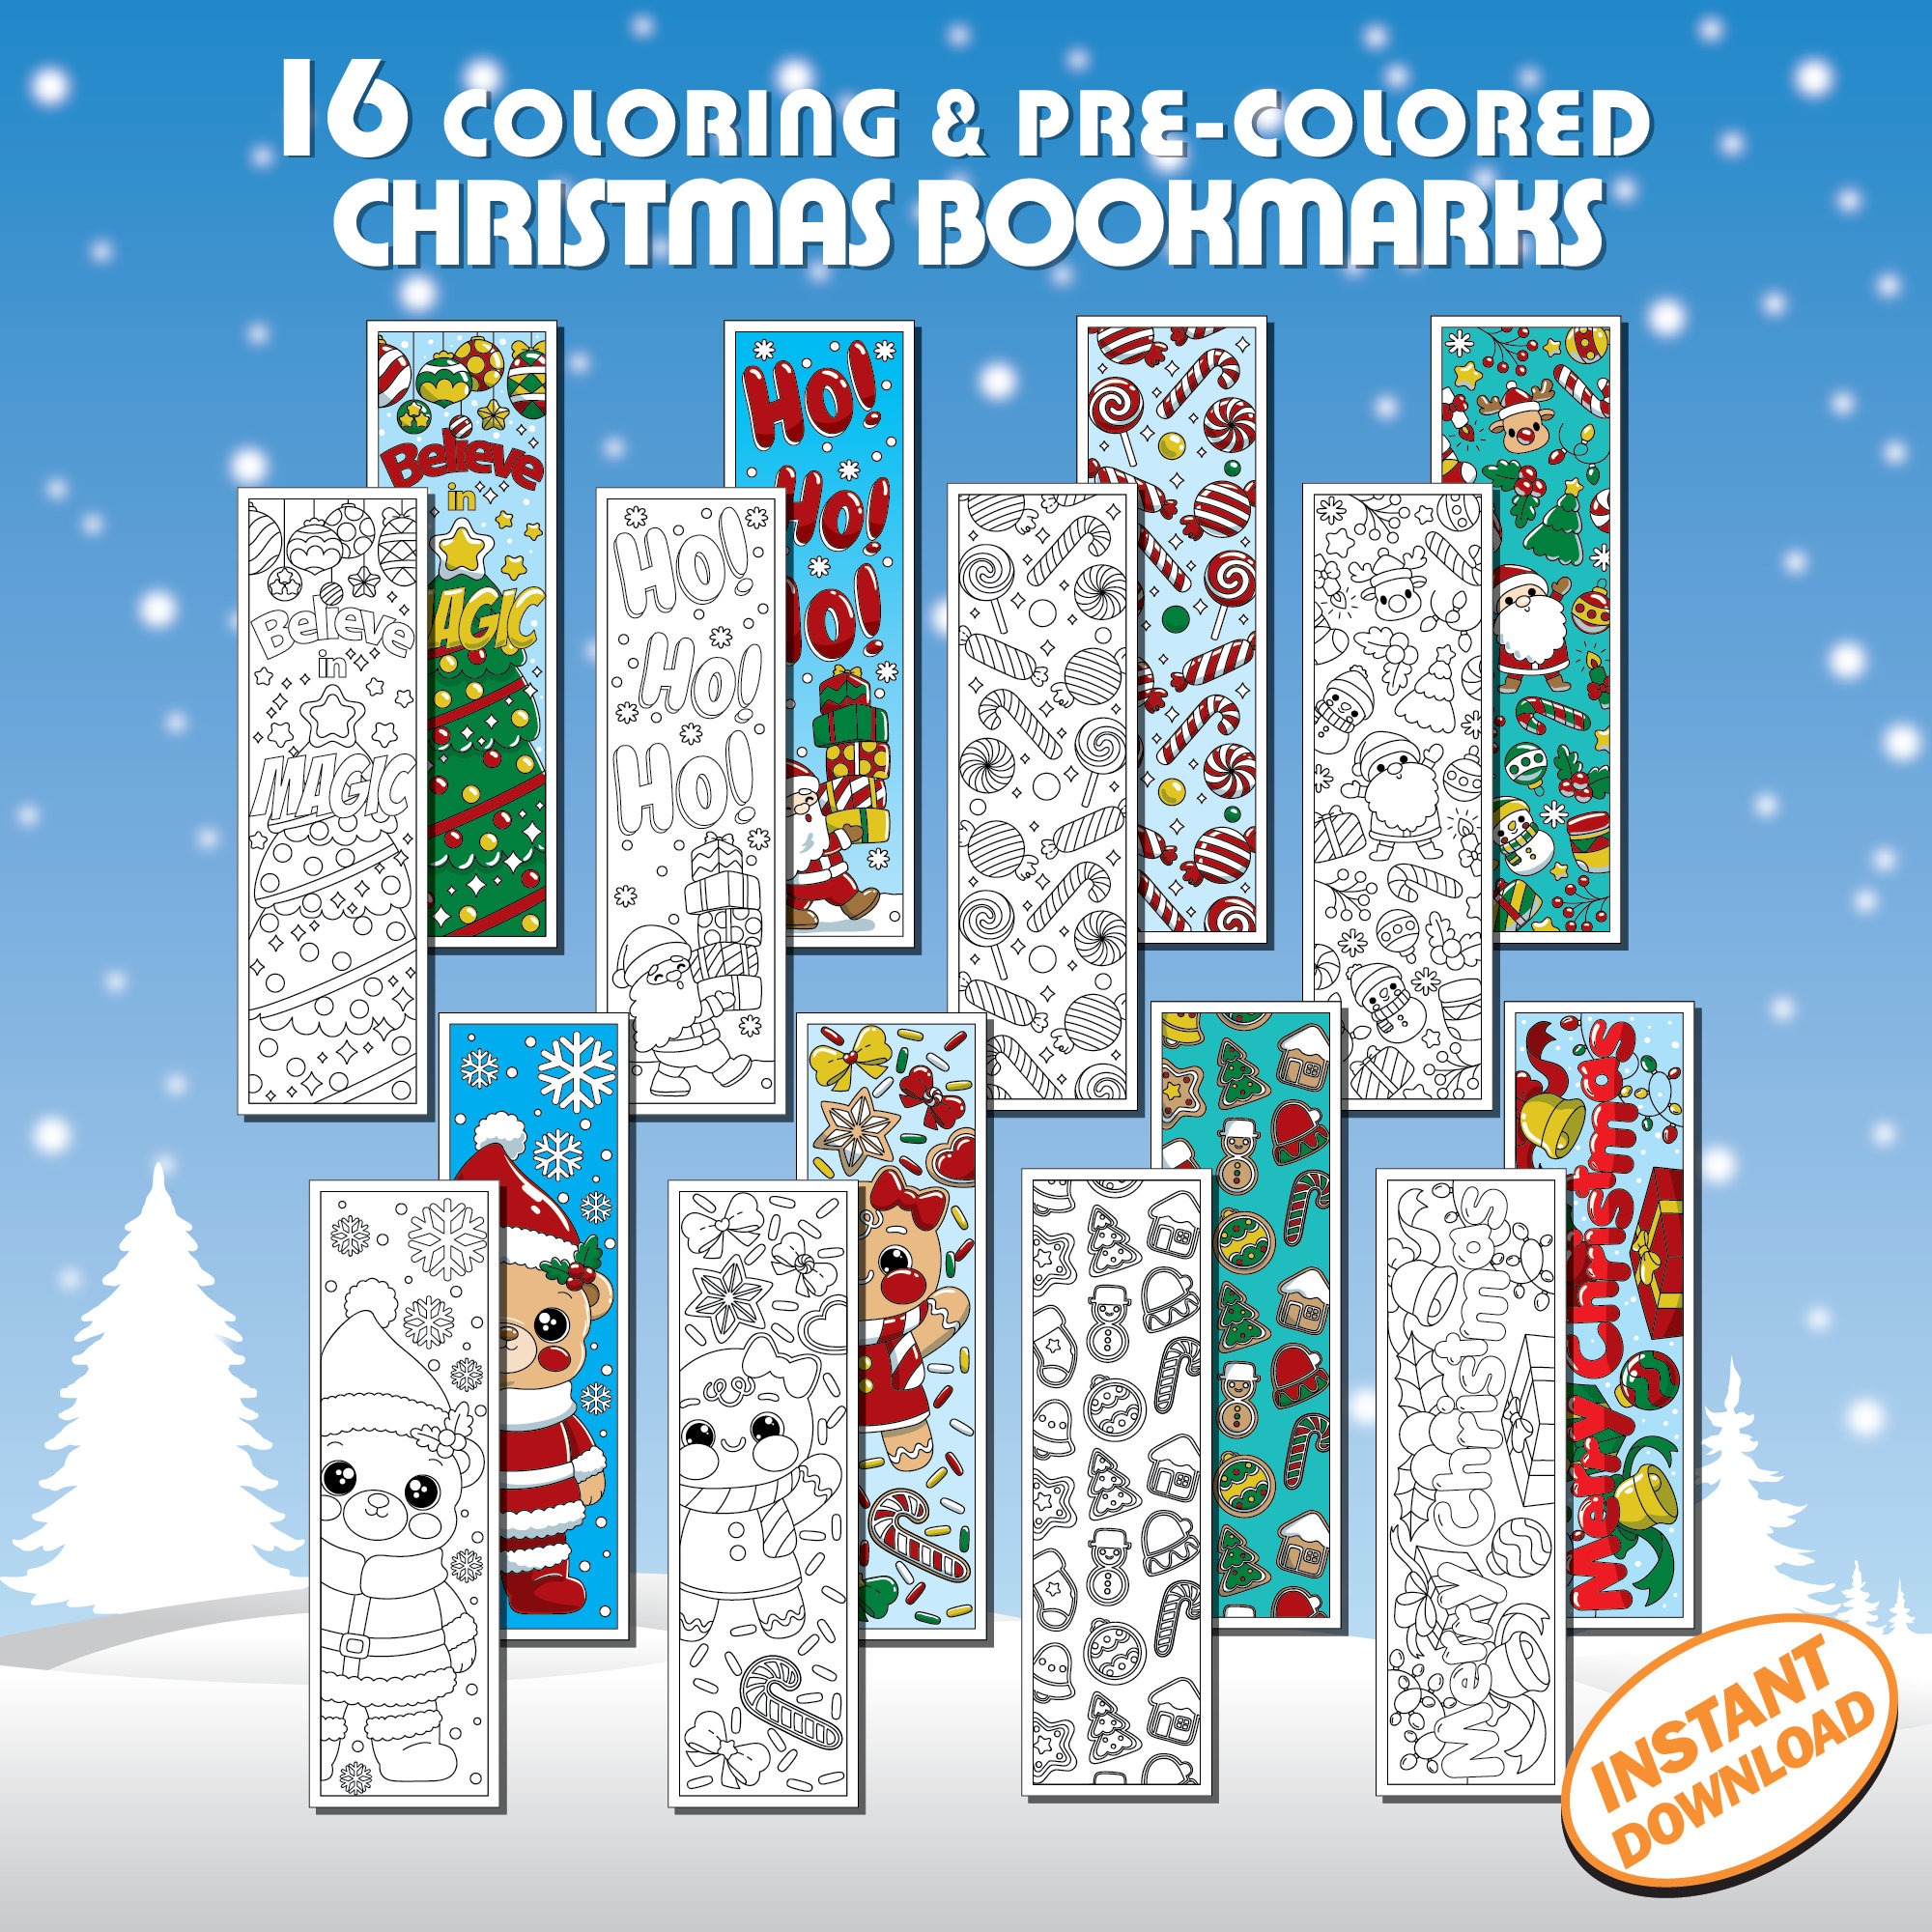 16 Coloring Christmas Bookmarks, December Holiday Festive Instant Digital Download PDF, Cute Set of Colorable DIY Make Your Marker for Book